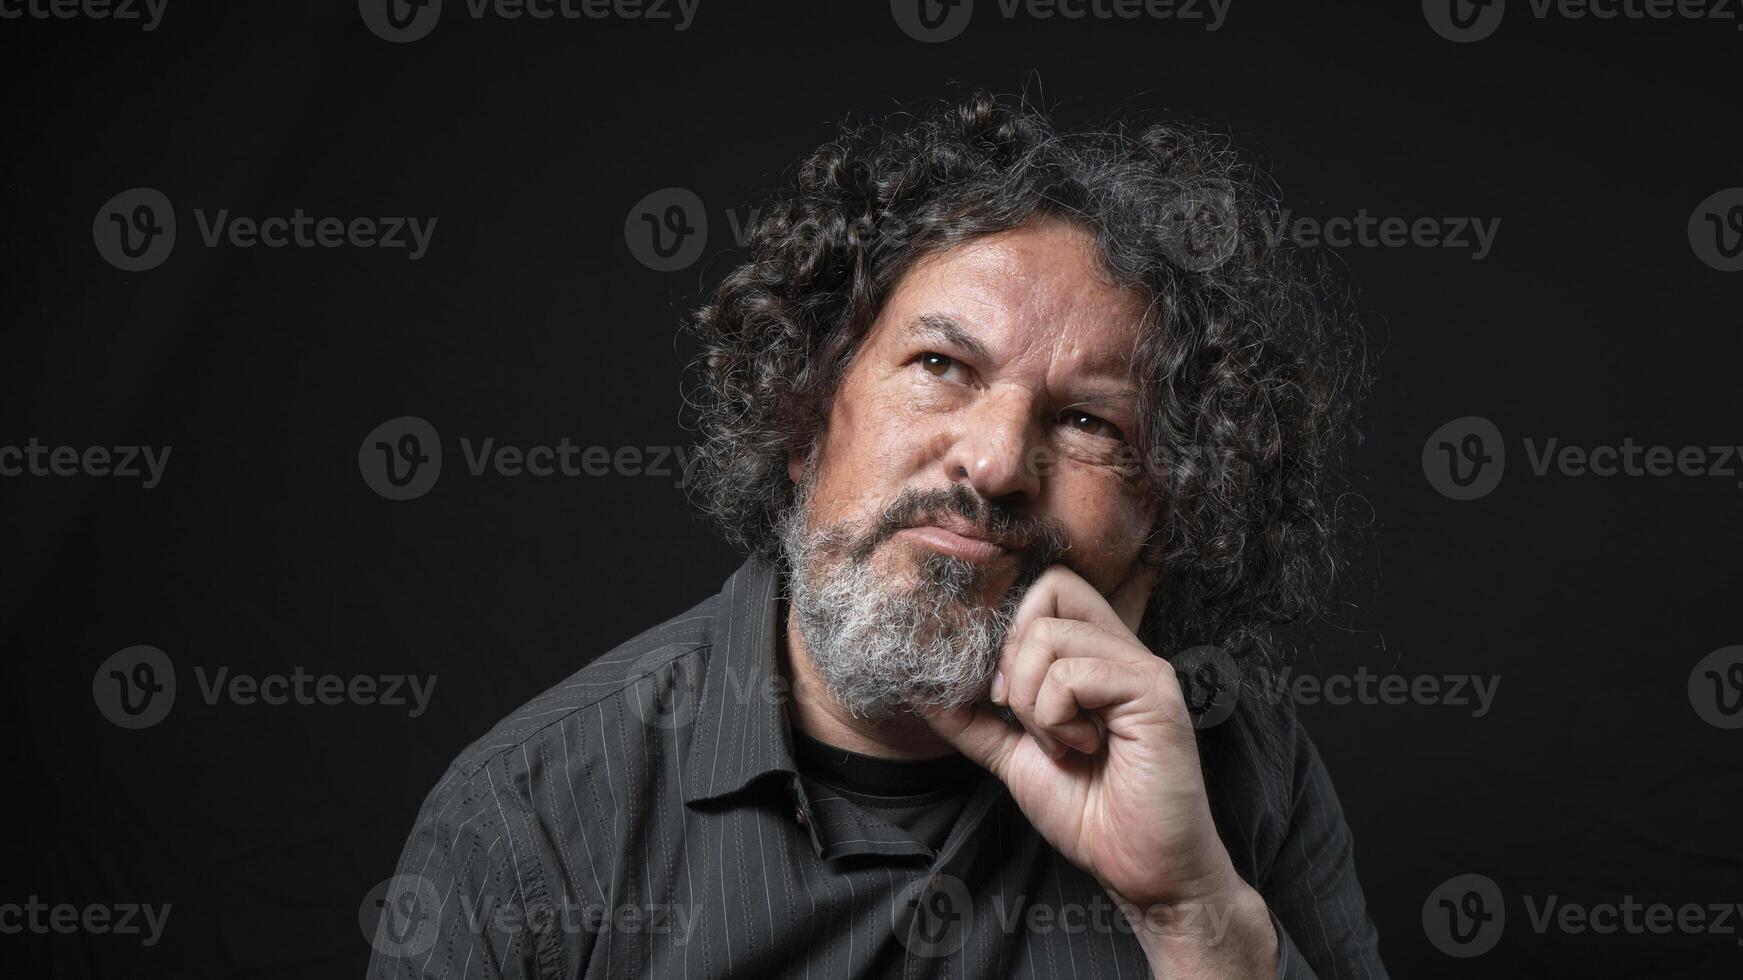 Man with white beard and black curly hair with thoughtful expression, resting his head on his hand, wearing black shirt against black background photo